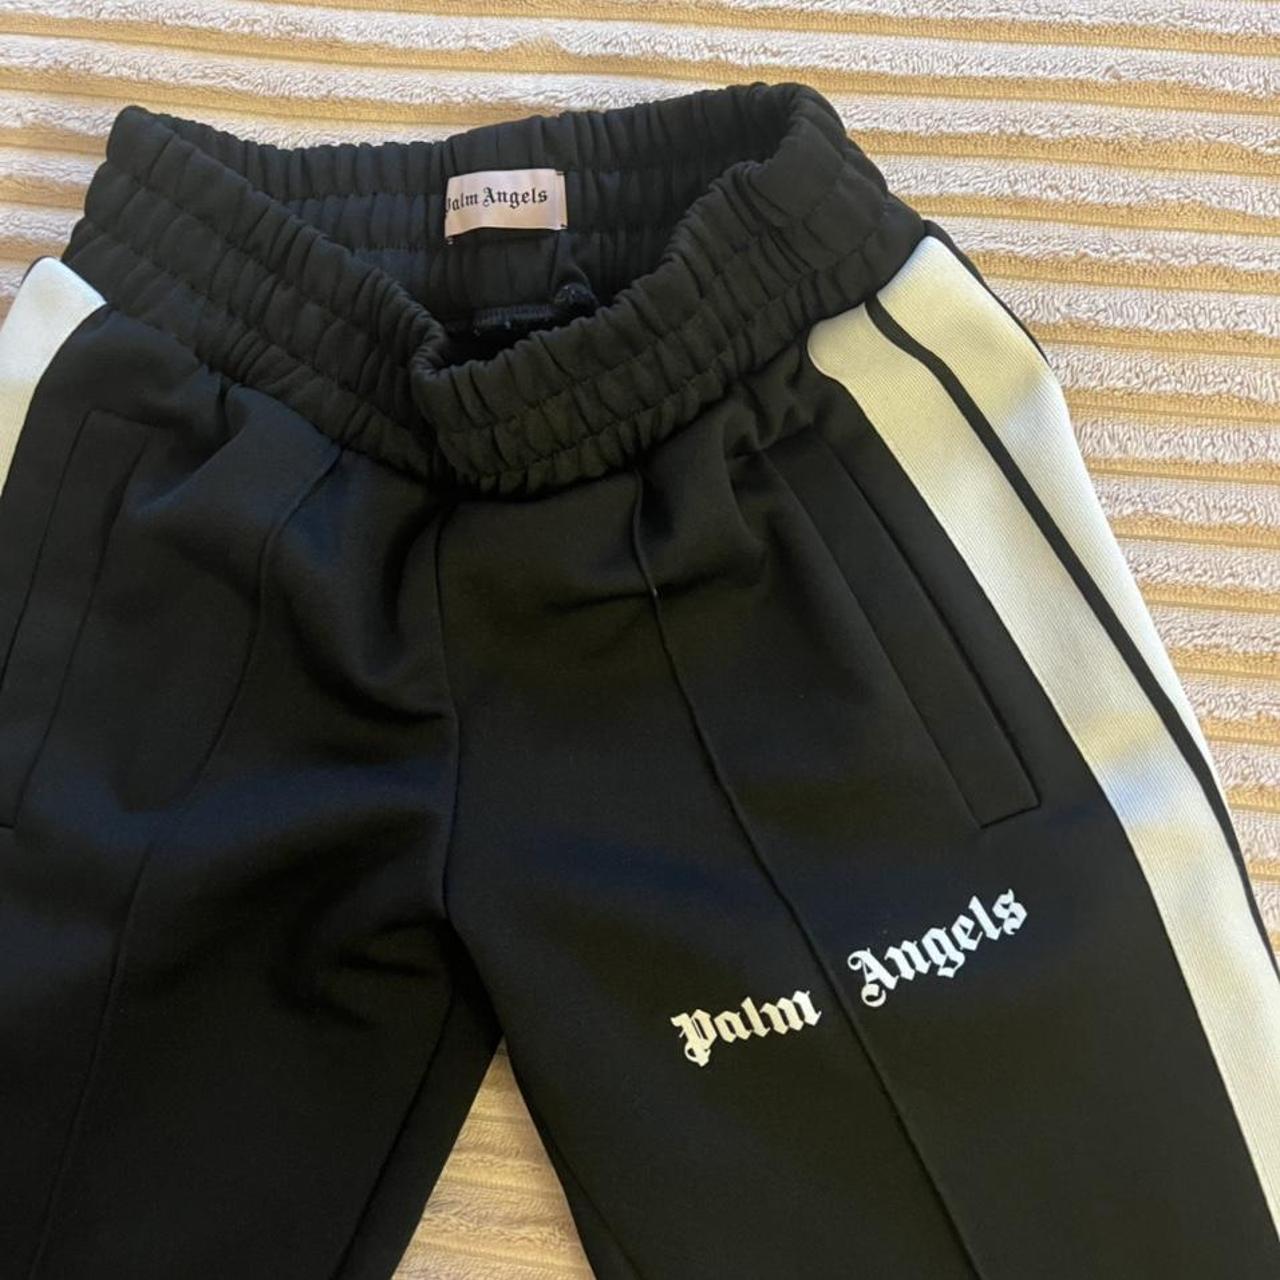 Palm Angels Women's Black and White Trousers